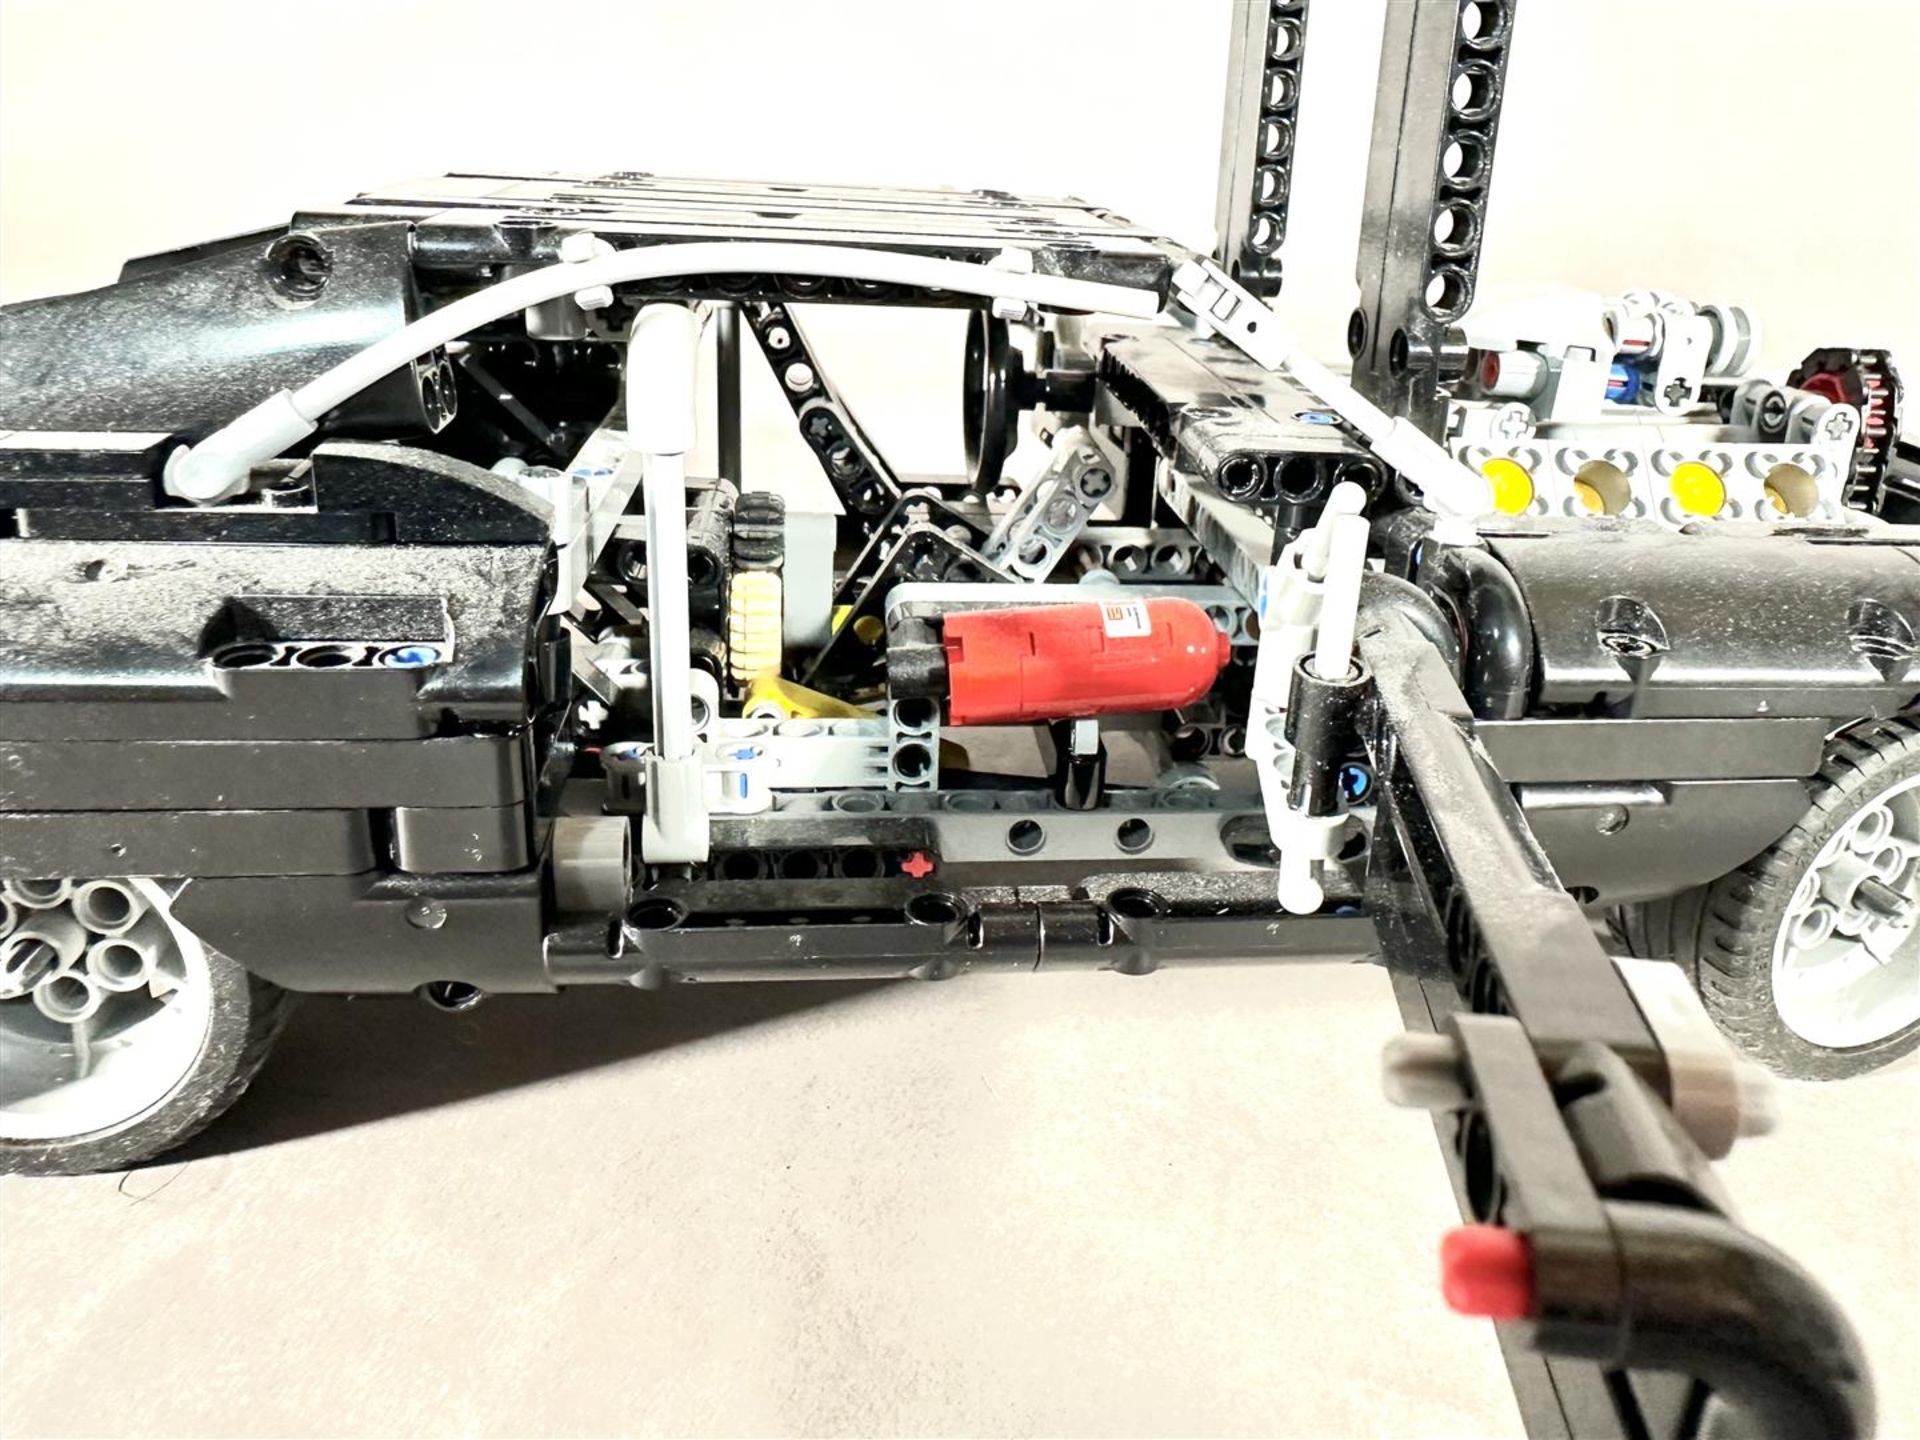 LEGO - Technic 42111 - Fast & Furious - Dom's Dodge Charger - Image 6 of 9